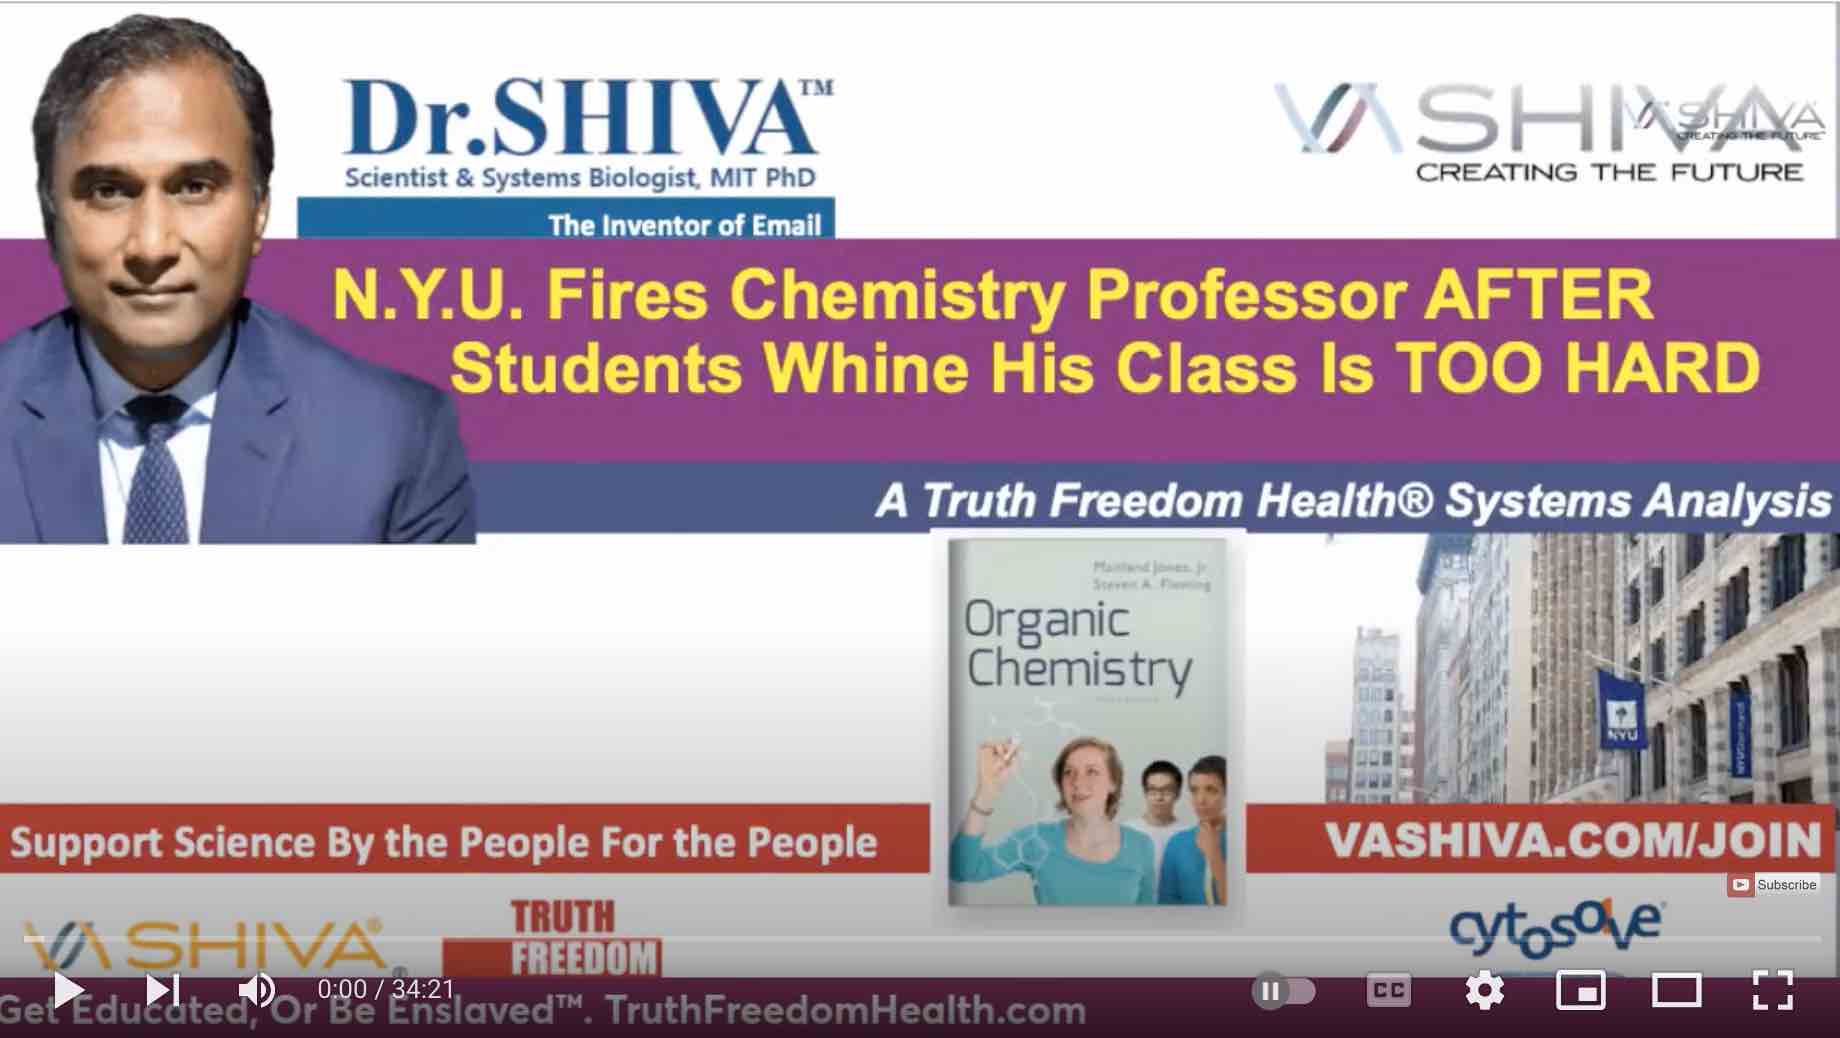 Dr.SHIVA LIVE: N.Y.U. Fires Chemistry Professor AFTER Pre-Med Students Whine His Class Is TOO HARD